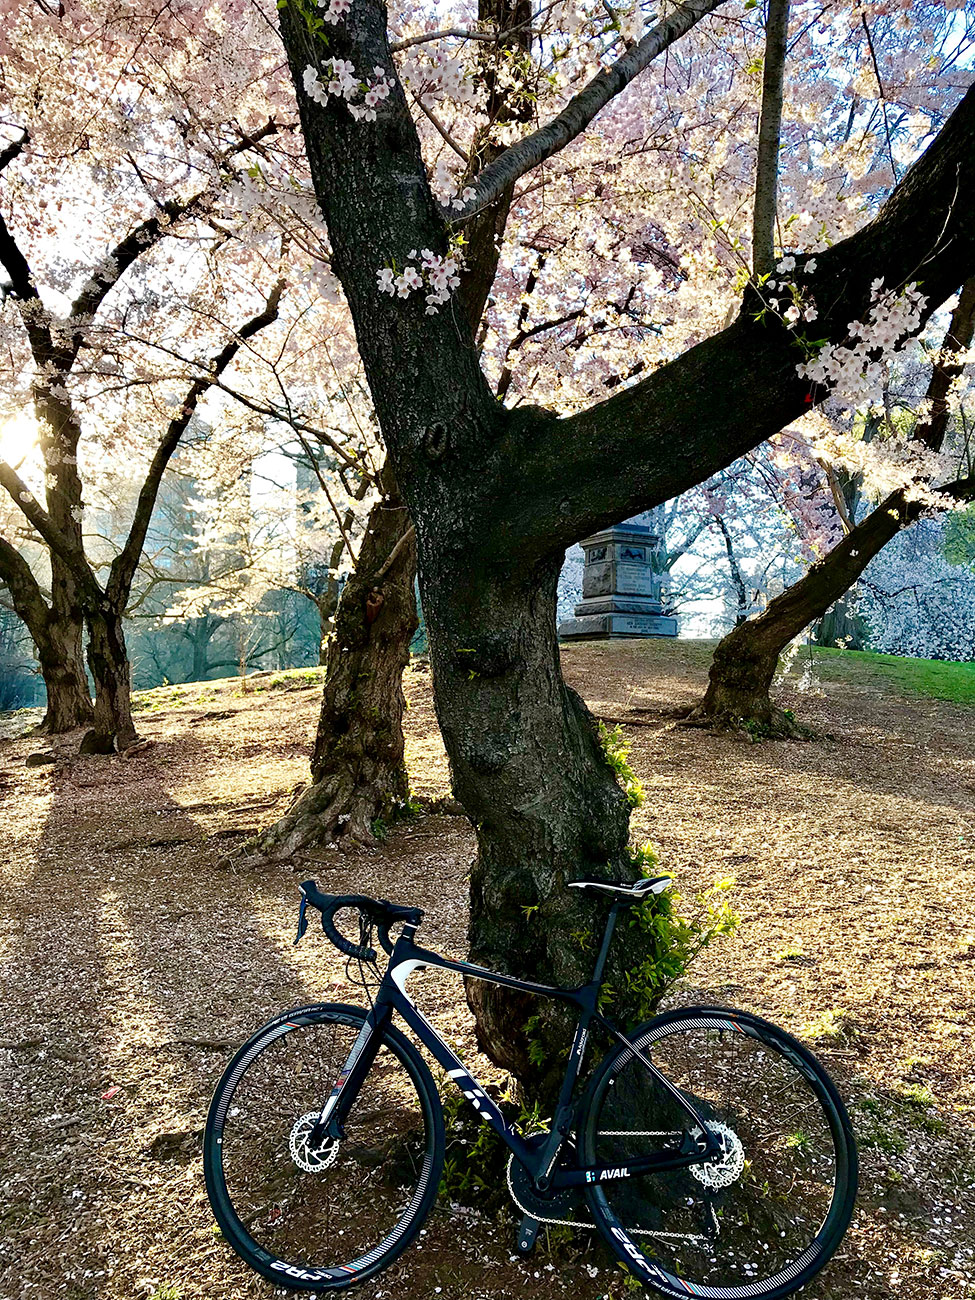 A bike leaning a against a tree in the park